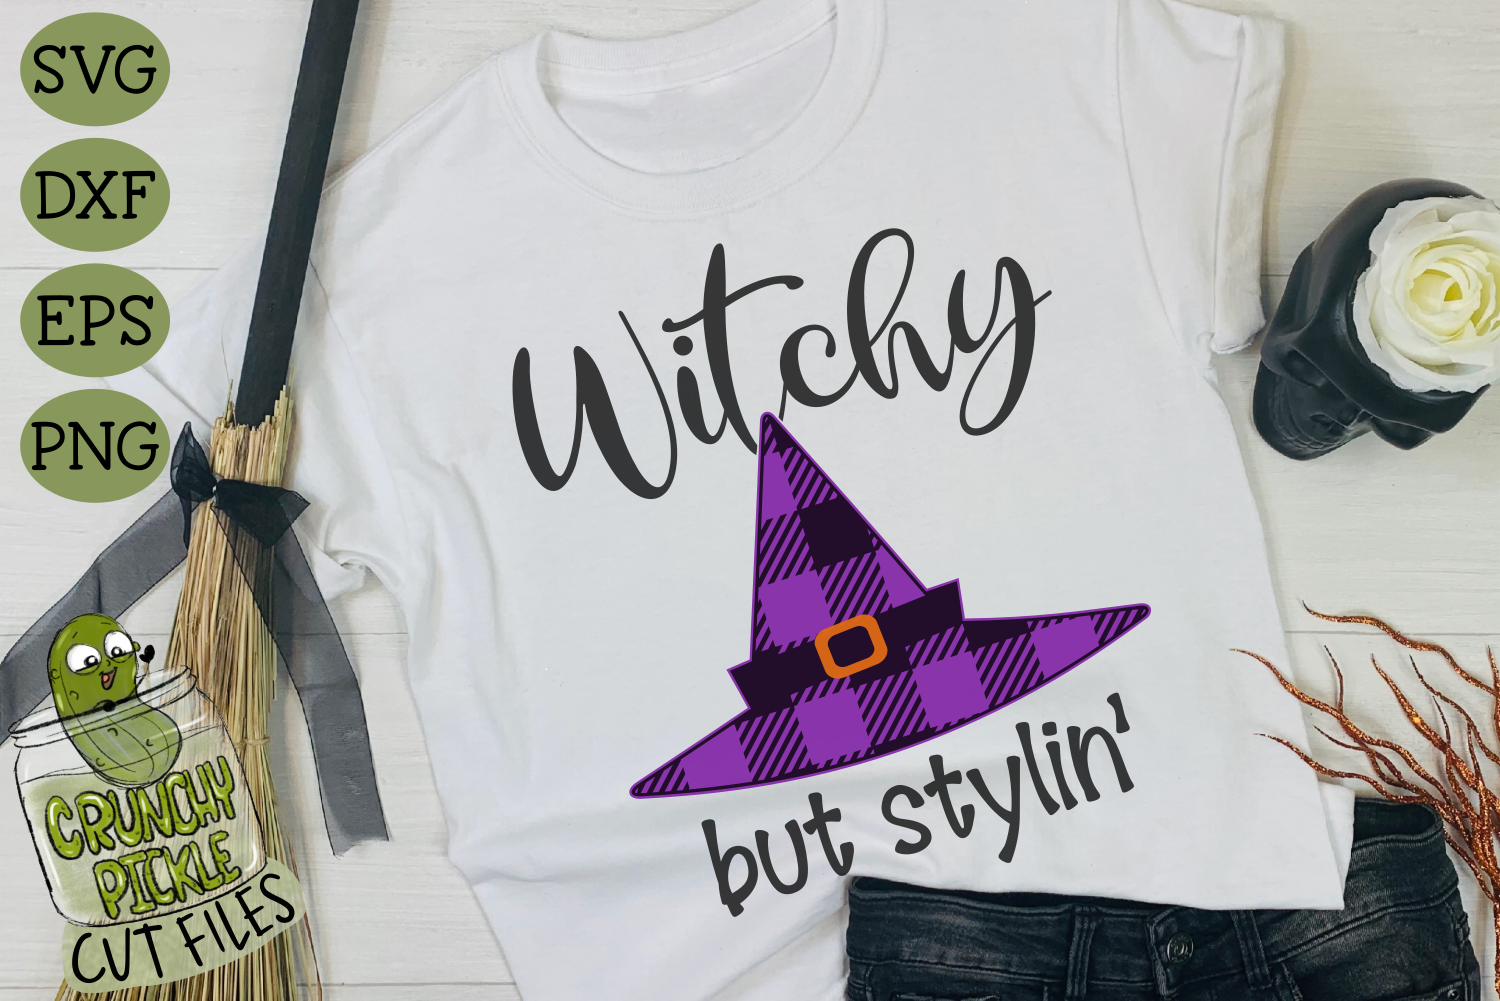 Witchy But Stylin' Halloween SVG File By Crunchy Pickle | TheHungryJPEG.com